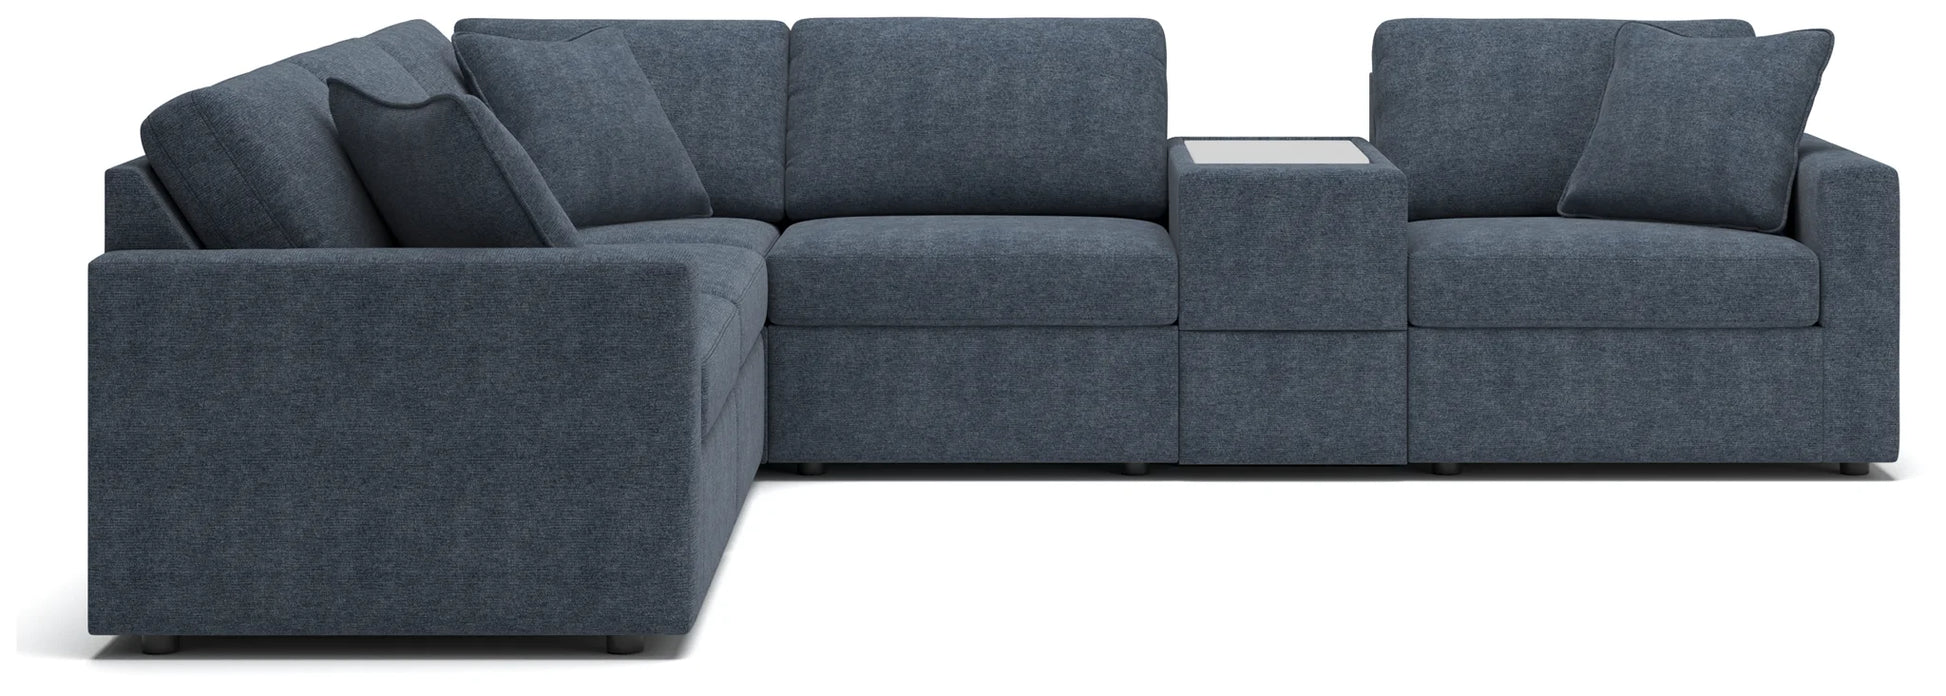 Modmax - Ink - 6-Piece Sectional With Storage Console 3